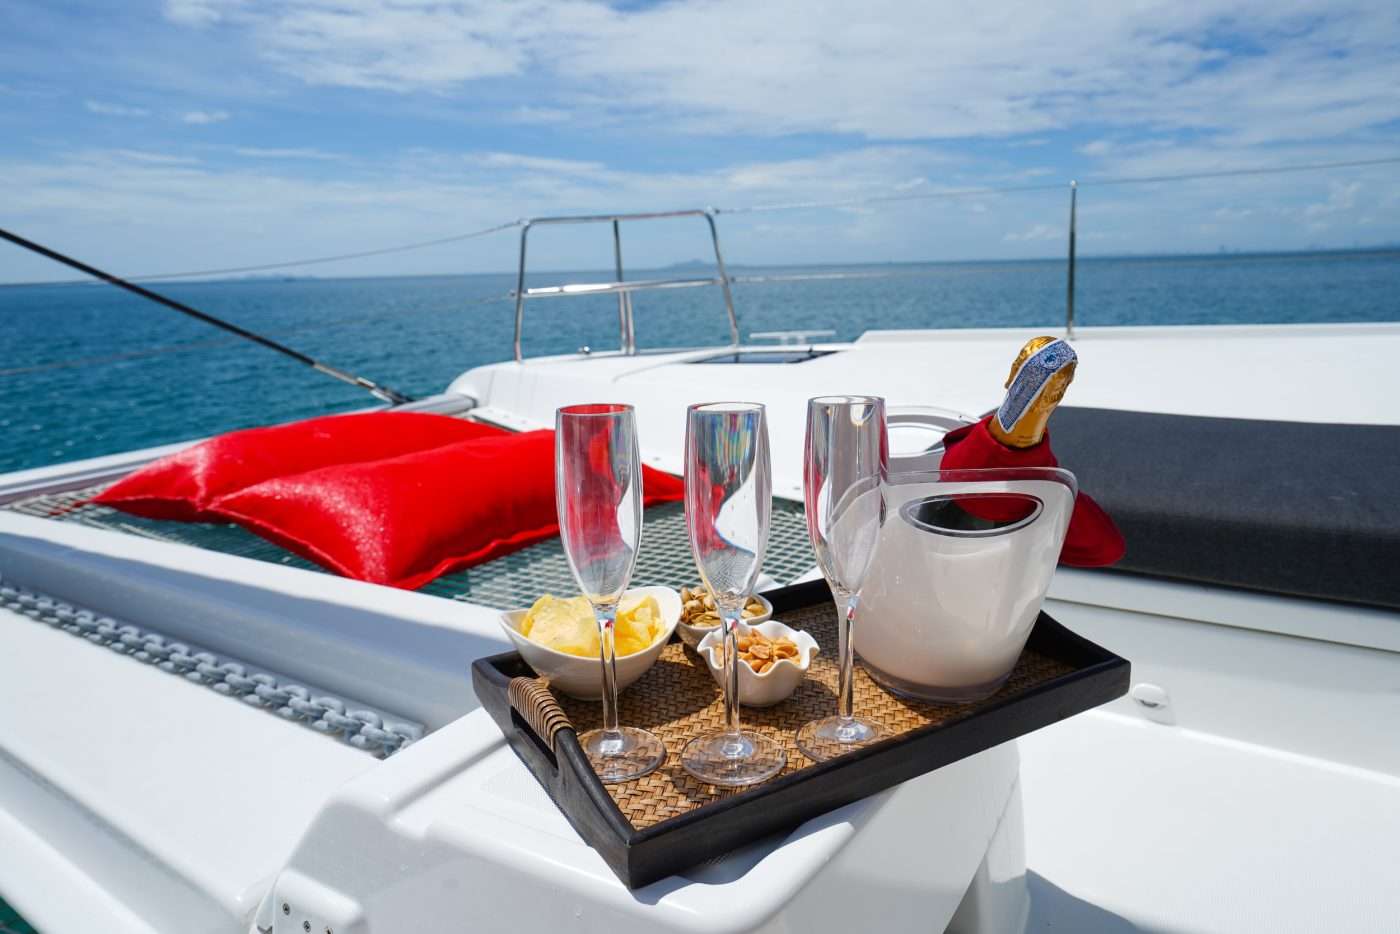 Maverick - Luxury yacht charter Thailand & Boat hire in SE Asia 4